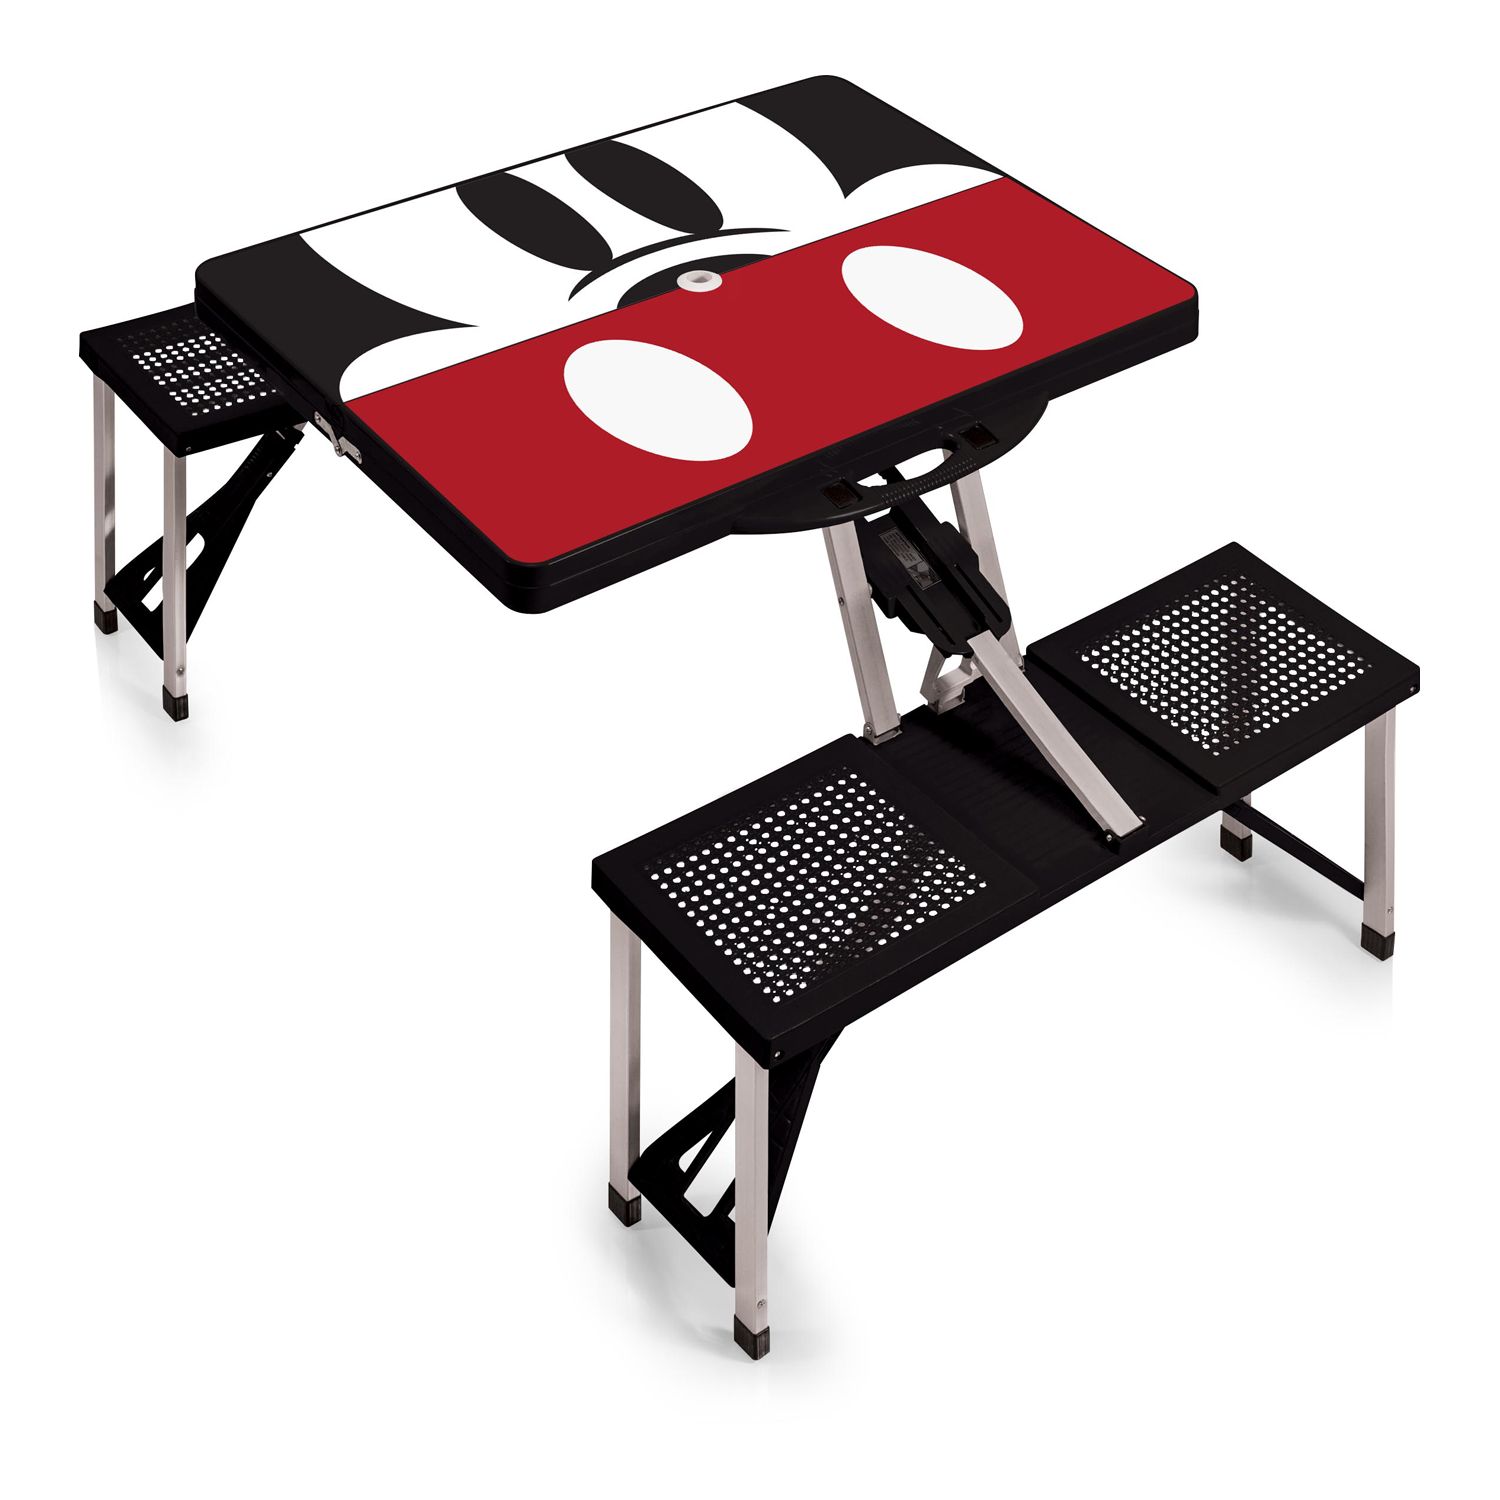 mickey mouse folding table and chairs